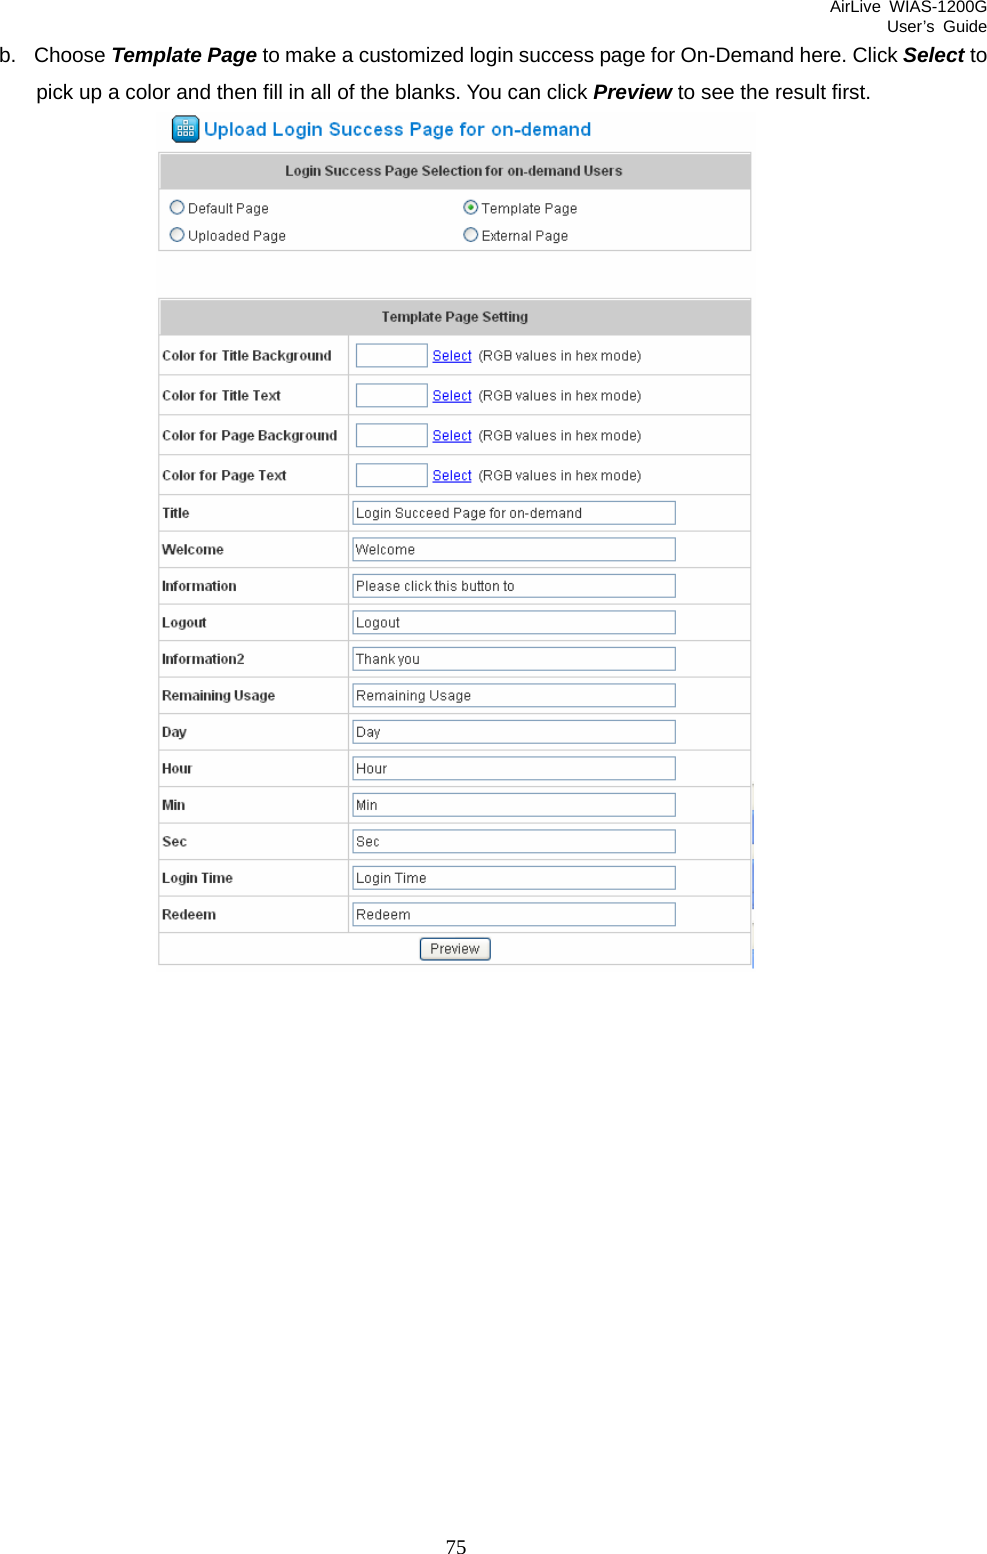 AirLive WIAS-1200G User’s Guide 75 b. Choose Template Page to make a customized login success page for On-Demand here. Click Select to pick up a color and then fill in all of the blanks. You can click Preview to see the result first.   